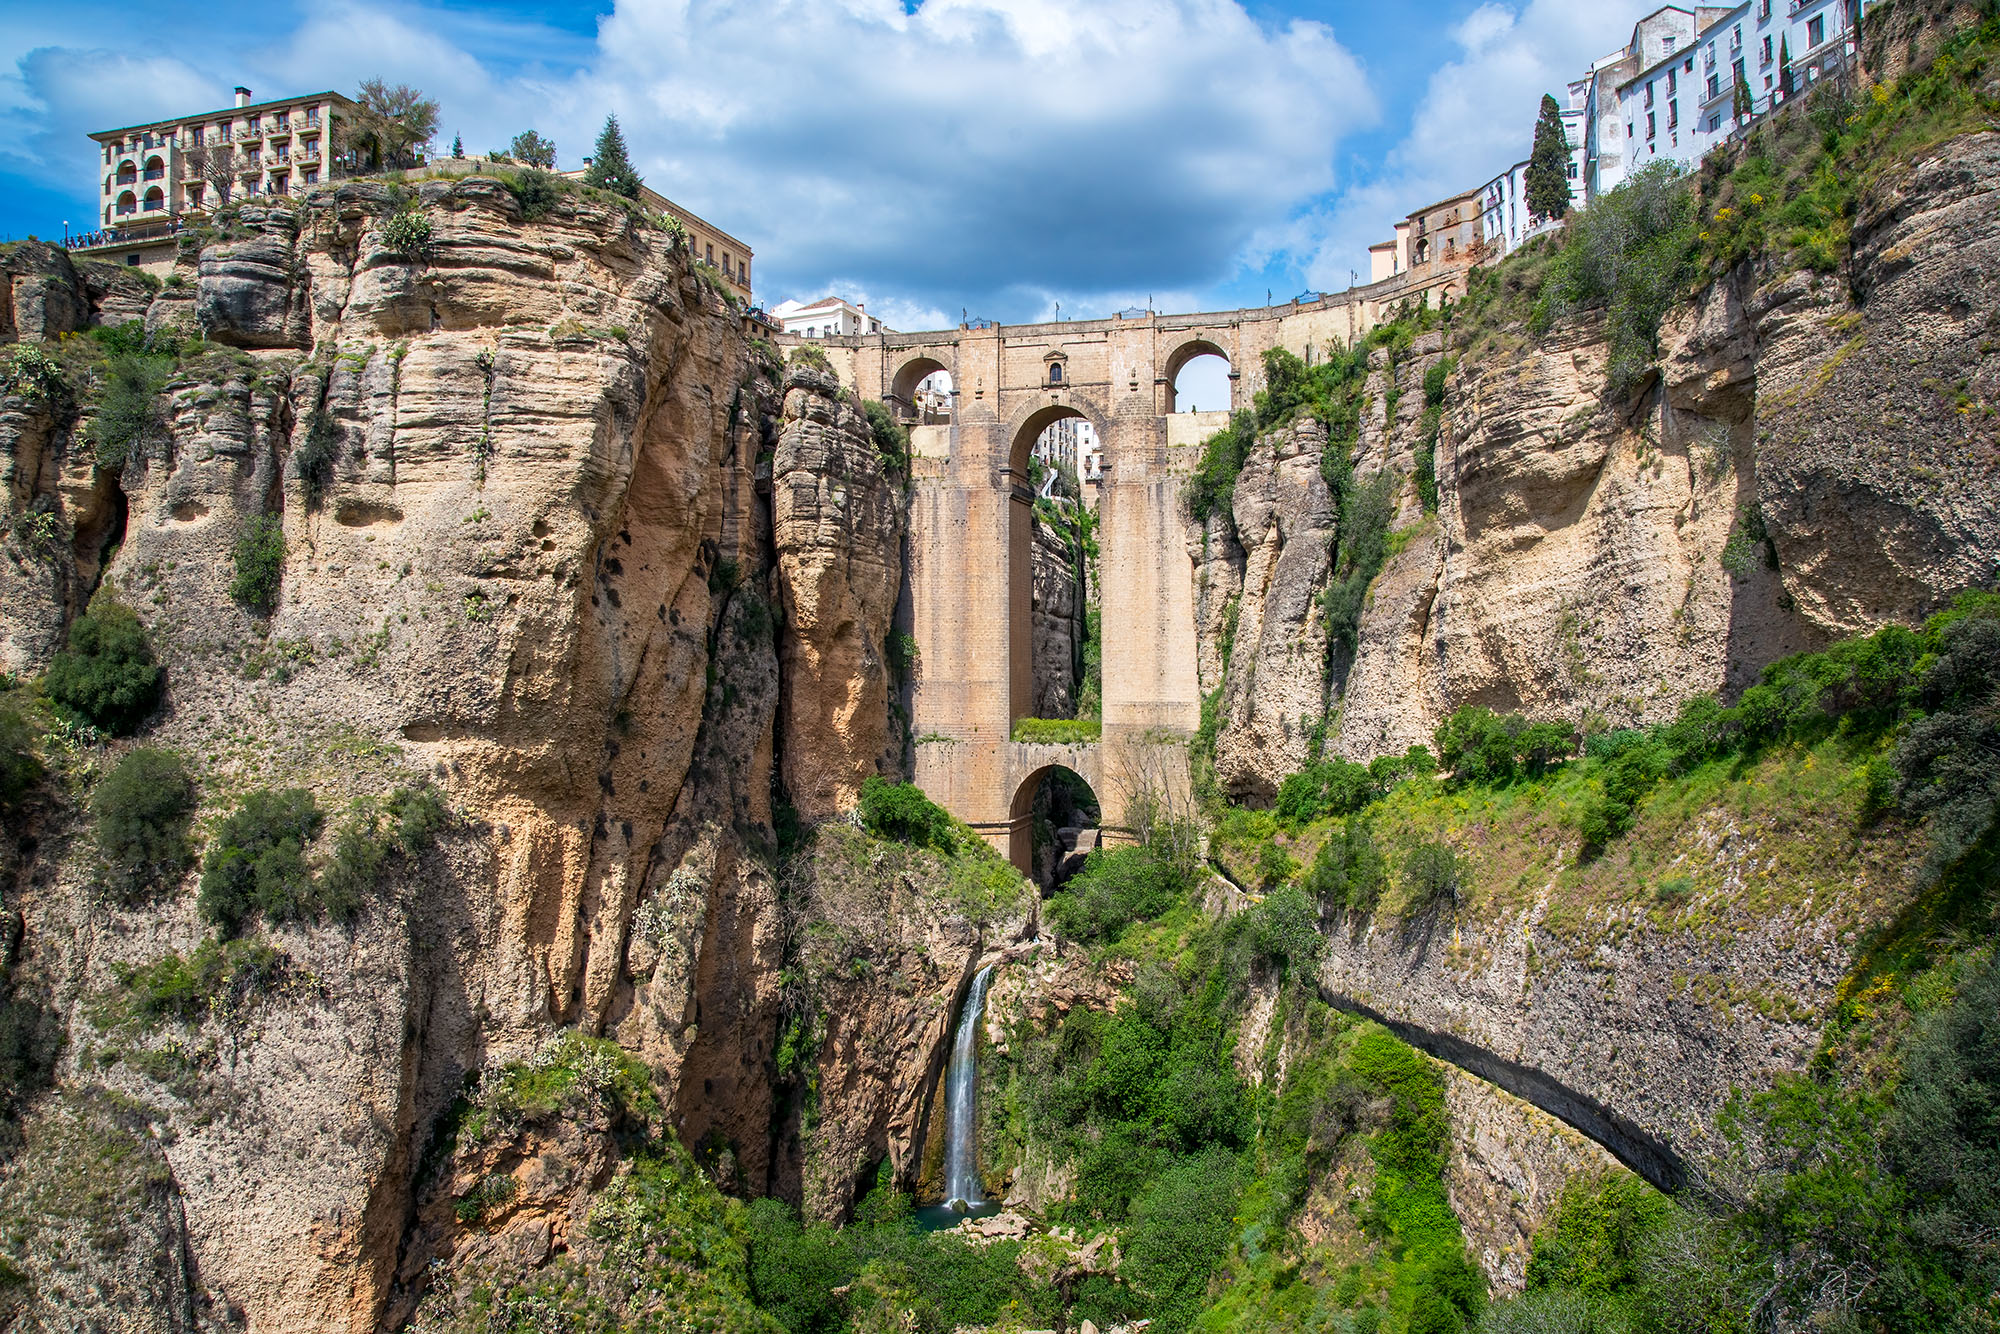 From below the historic town of Ronda, Spain, I gazed upward at the Puente Nuevo Bridge, a magnificent span that links the town...